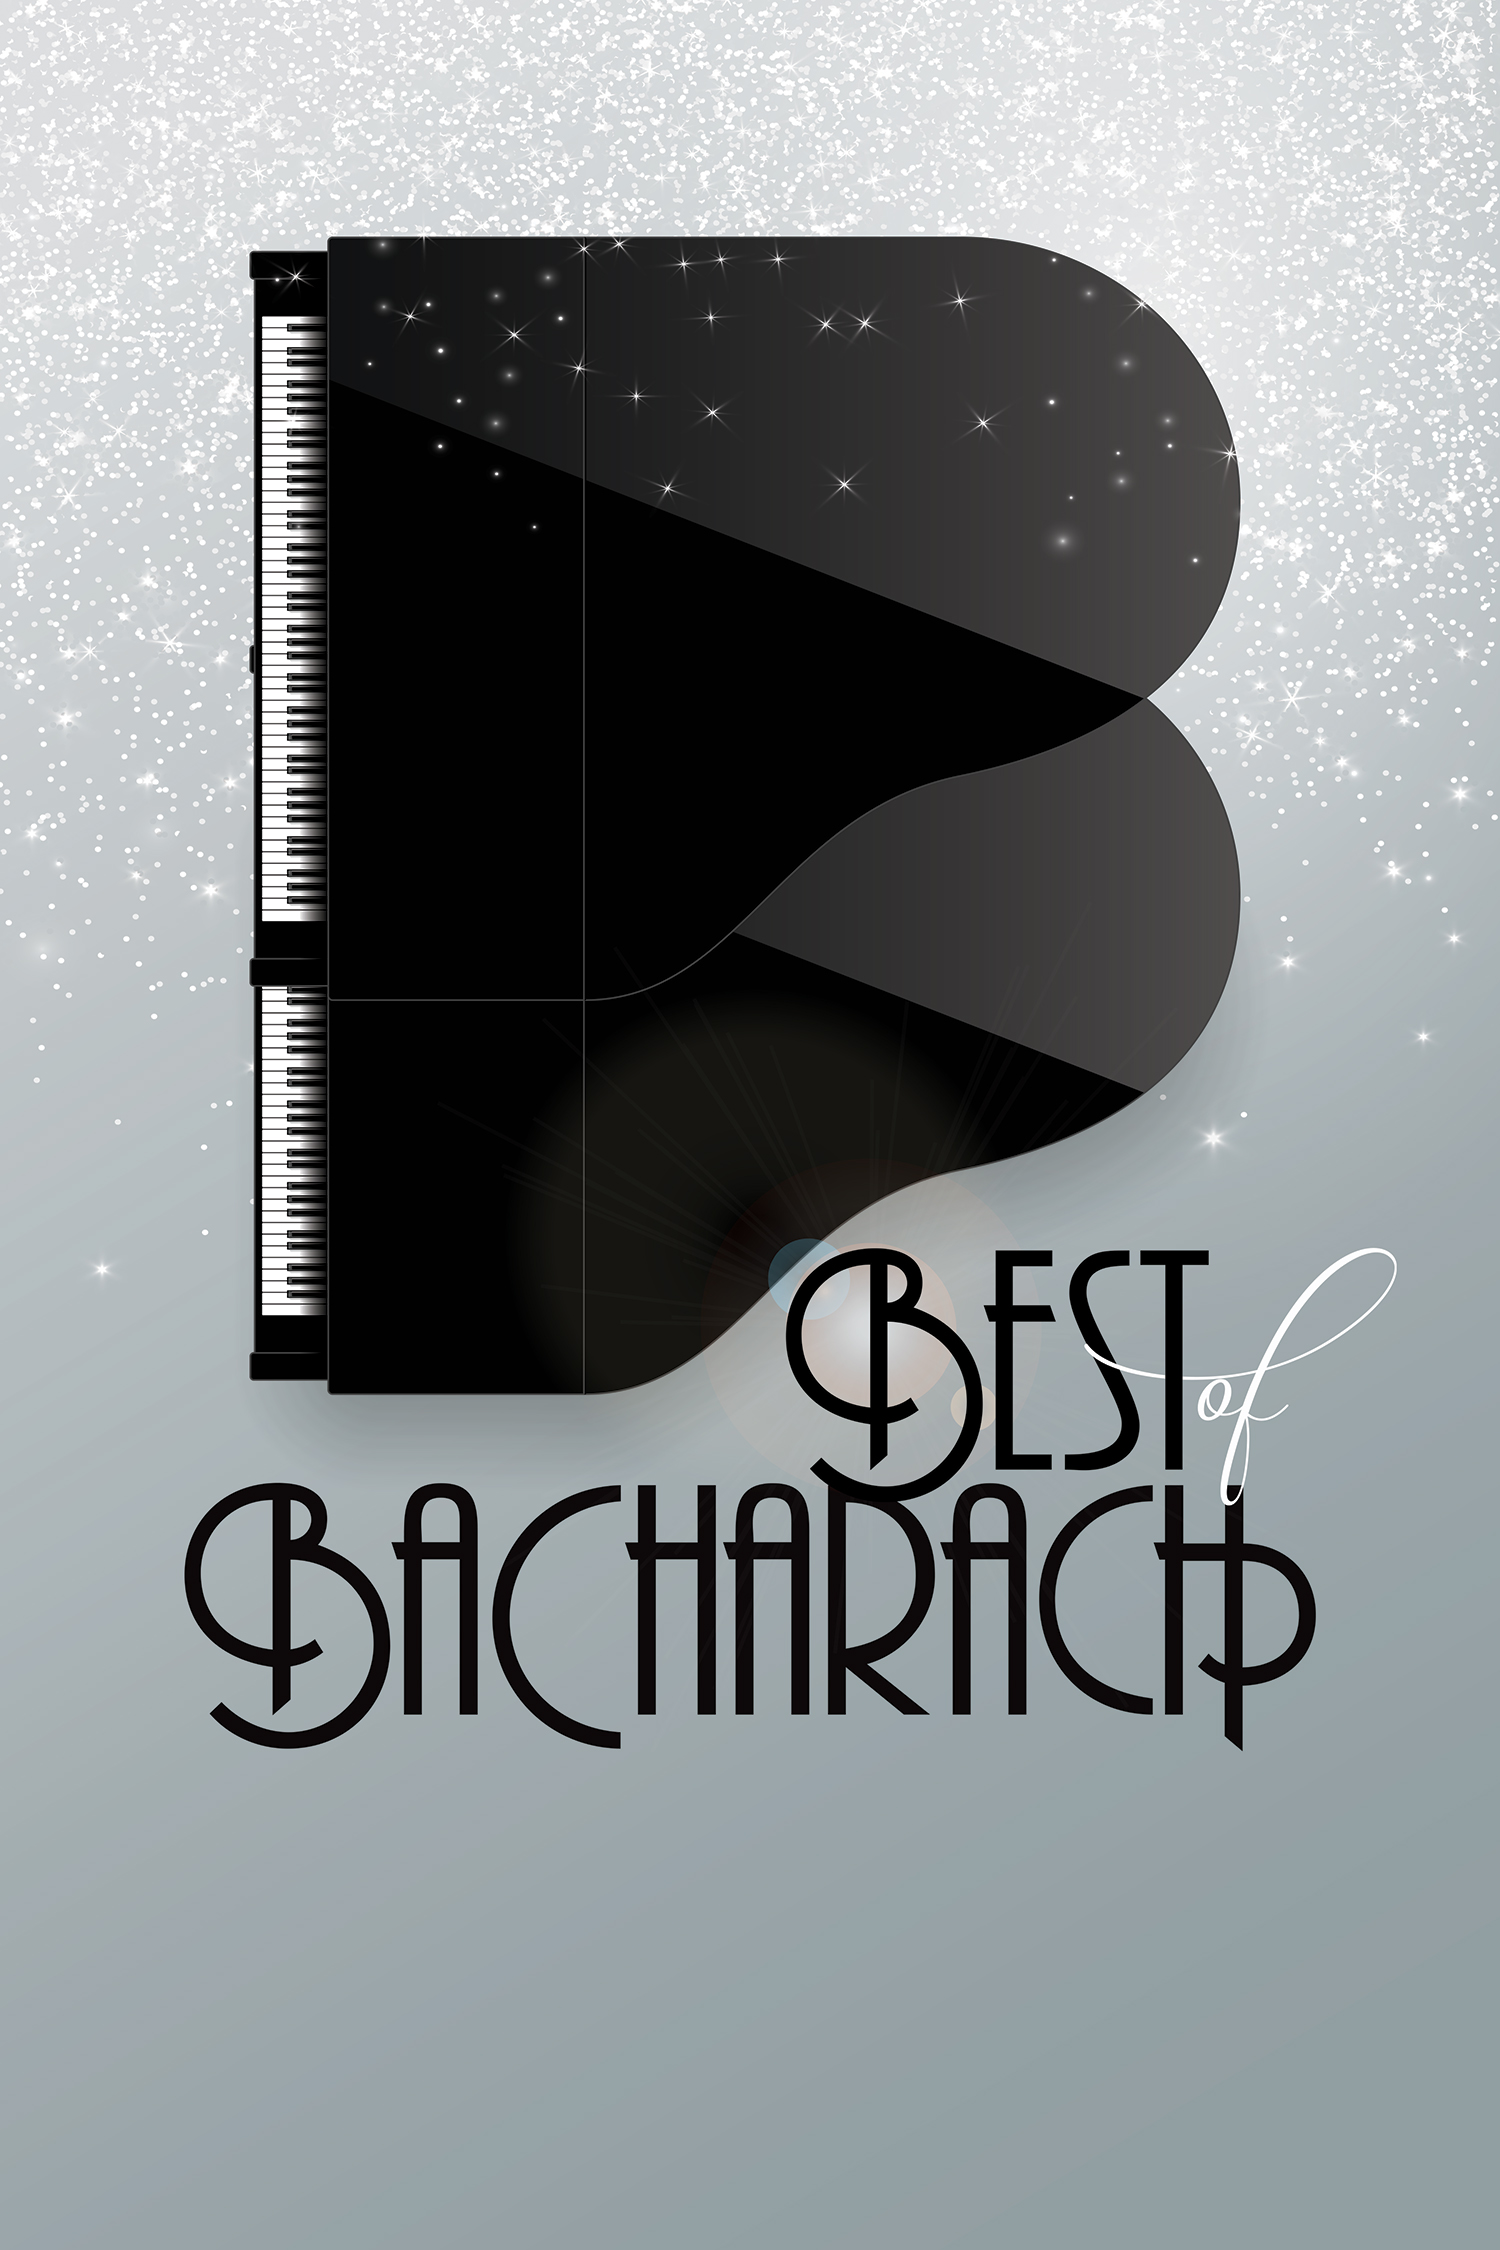 The Best of Bacharach